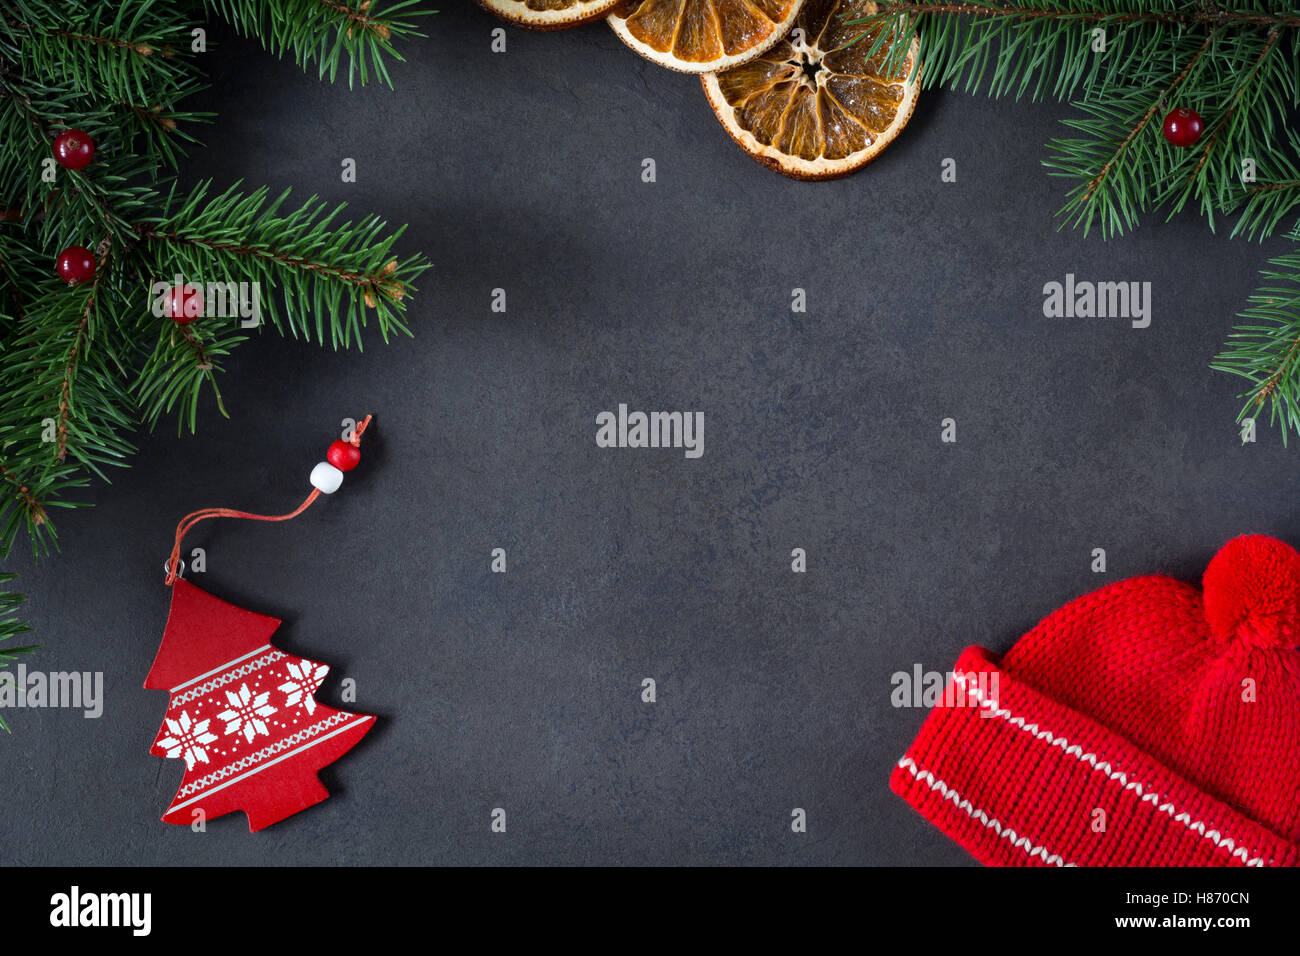 Background for Christmas or New Year Stock Photo